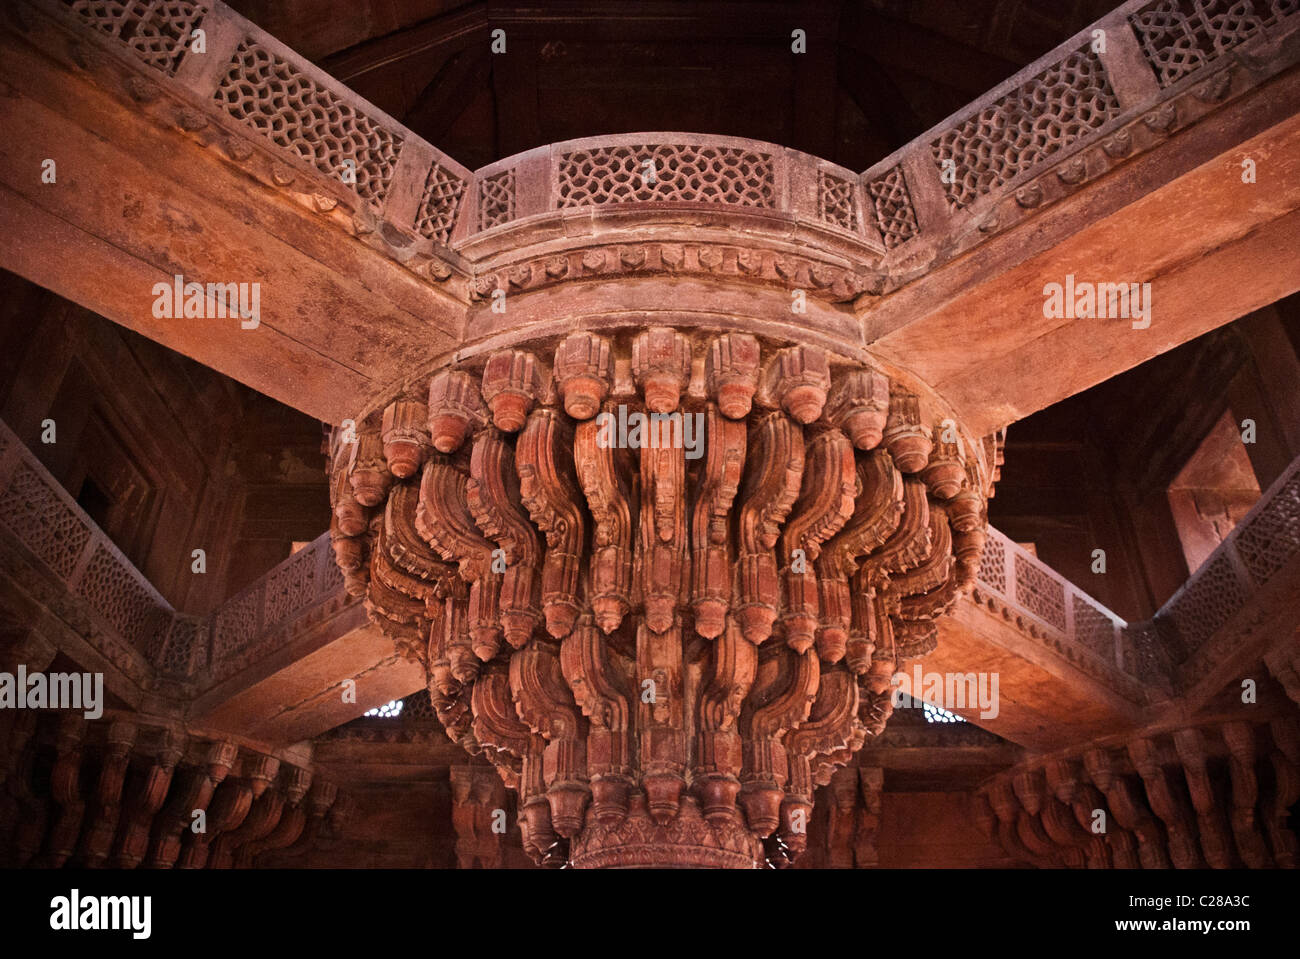 Details of the architecture at Fatehpur Sikri, the deserted town of the Mughal Dynasty. Stock Photo